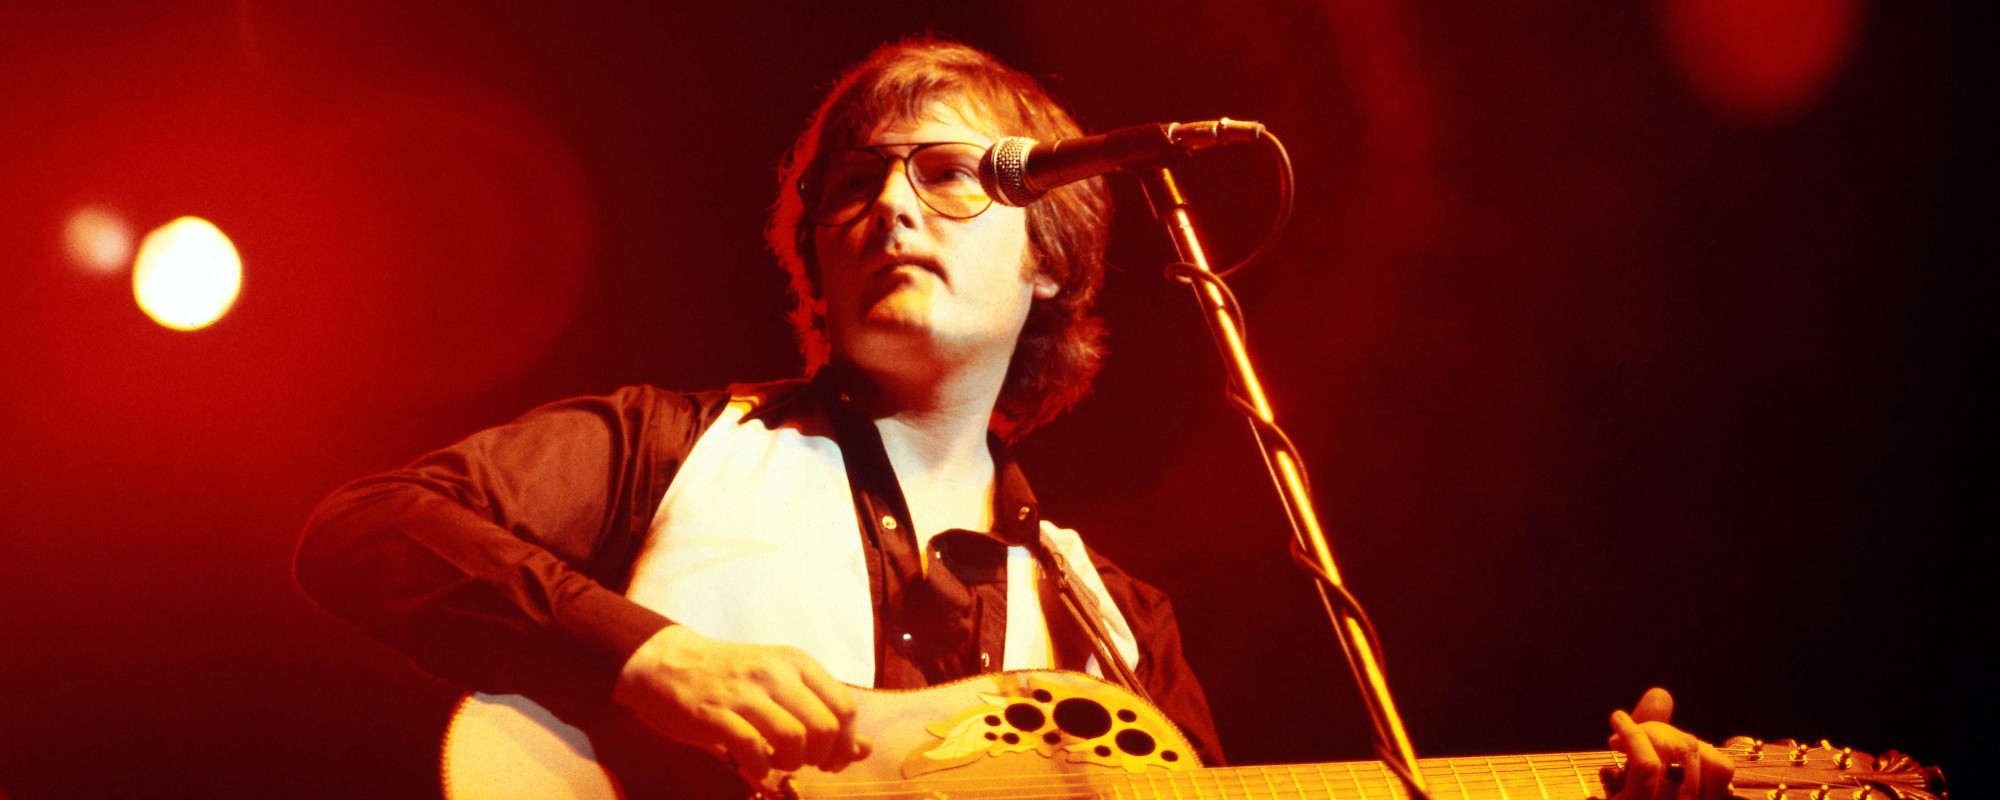 The Meaning Behind “Baker Street” by Gerry Rafferty and How It Reflects the Artist’s Career at the Time